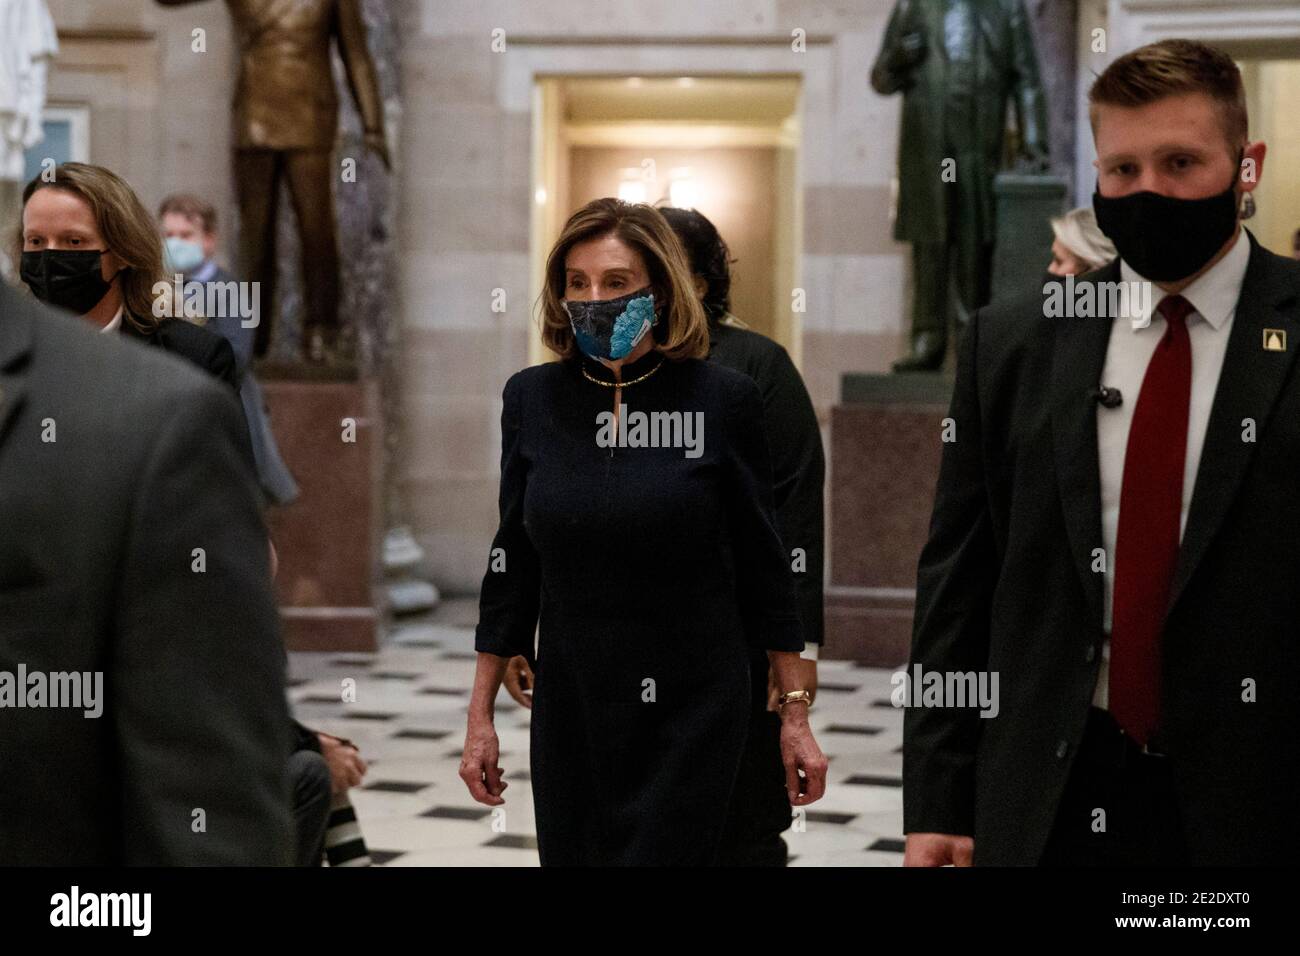 Washington, USA. 13th Jan, 2021. U.S. House Speaker Nancy Pelosi (C) wearing a protective mask walks through the hallways in Capitol Building in Washington, DC, the United States, Jan. 13, 2021. A majority of lawmakers in the U.S. House on Wednesday voted for impeaching President Donald Trump over 'incitement of insurrection,' making him the first president to be impeached twice. Credit: Ting Shen/Xinhua/Alamy Live News Stock Photo